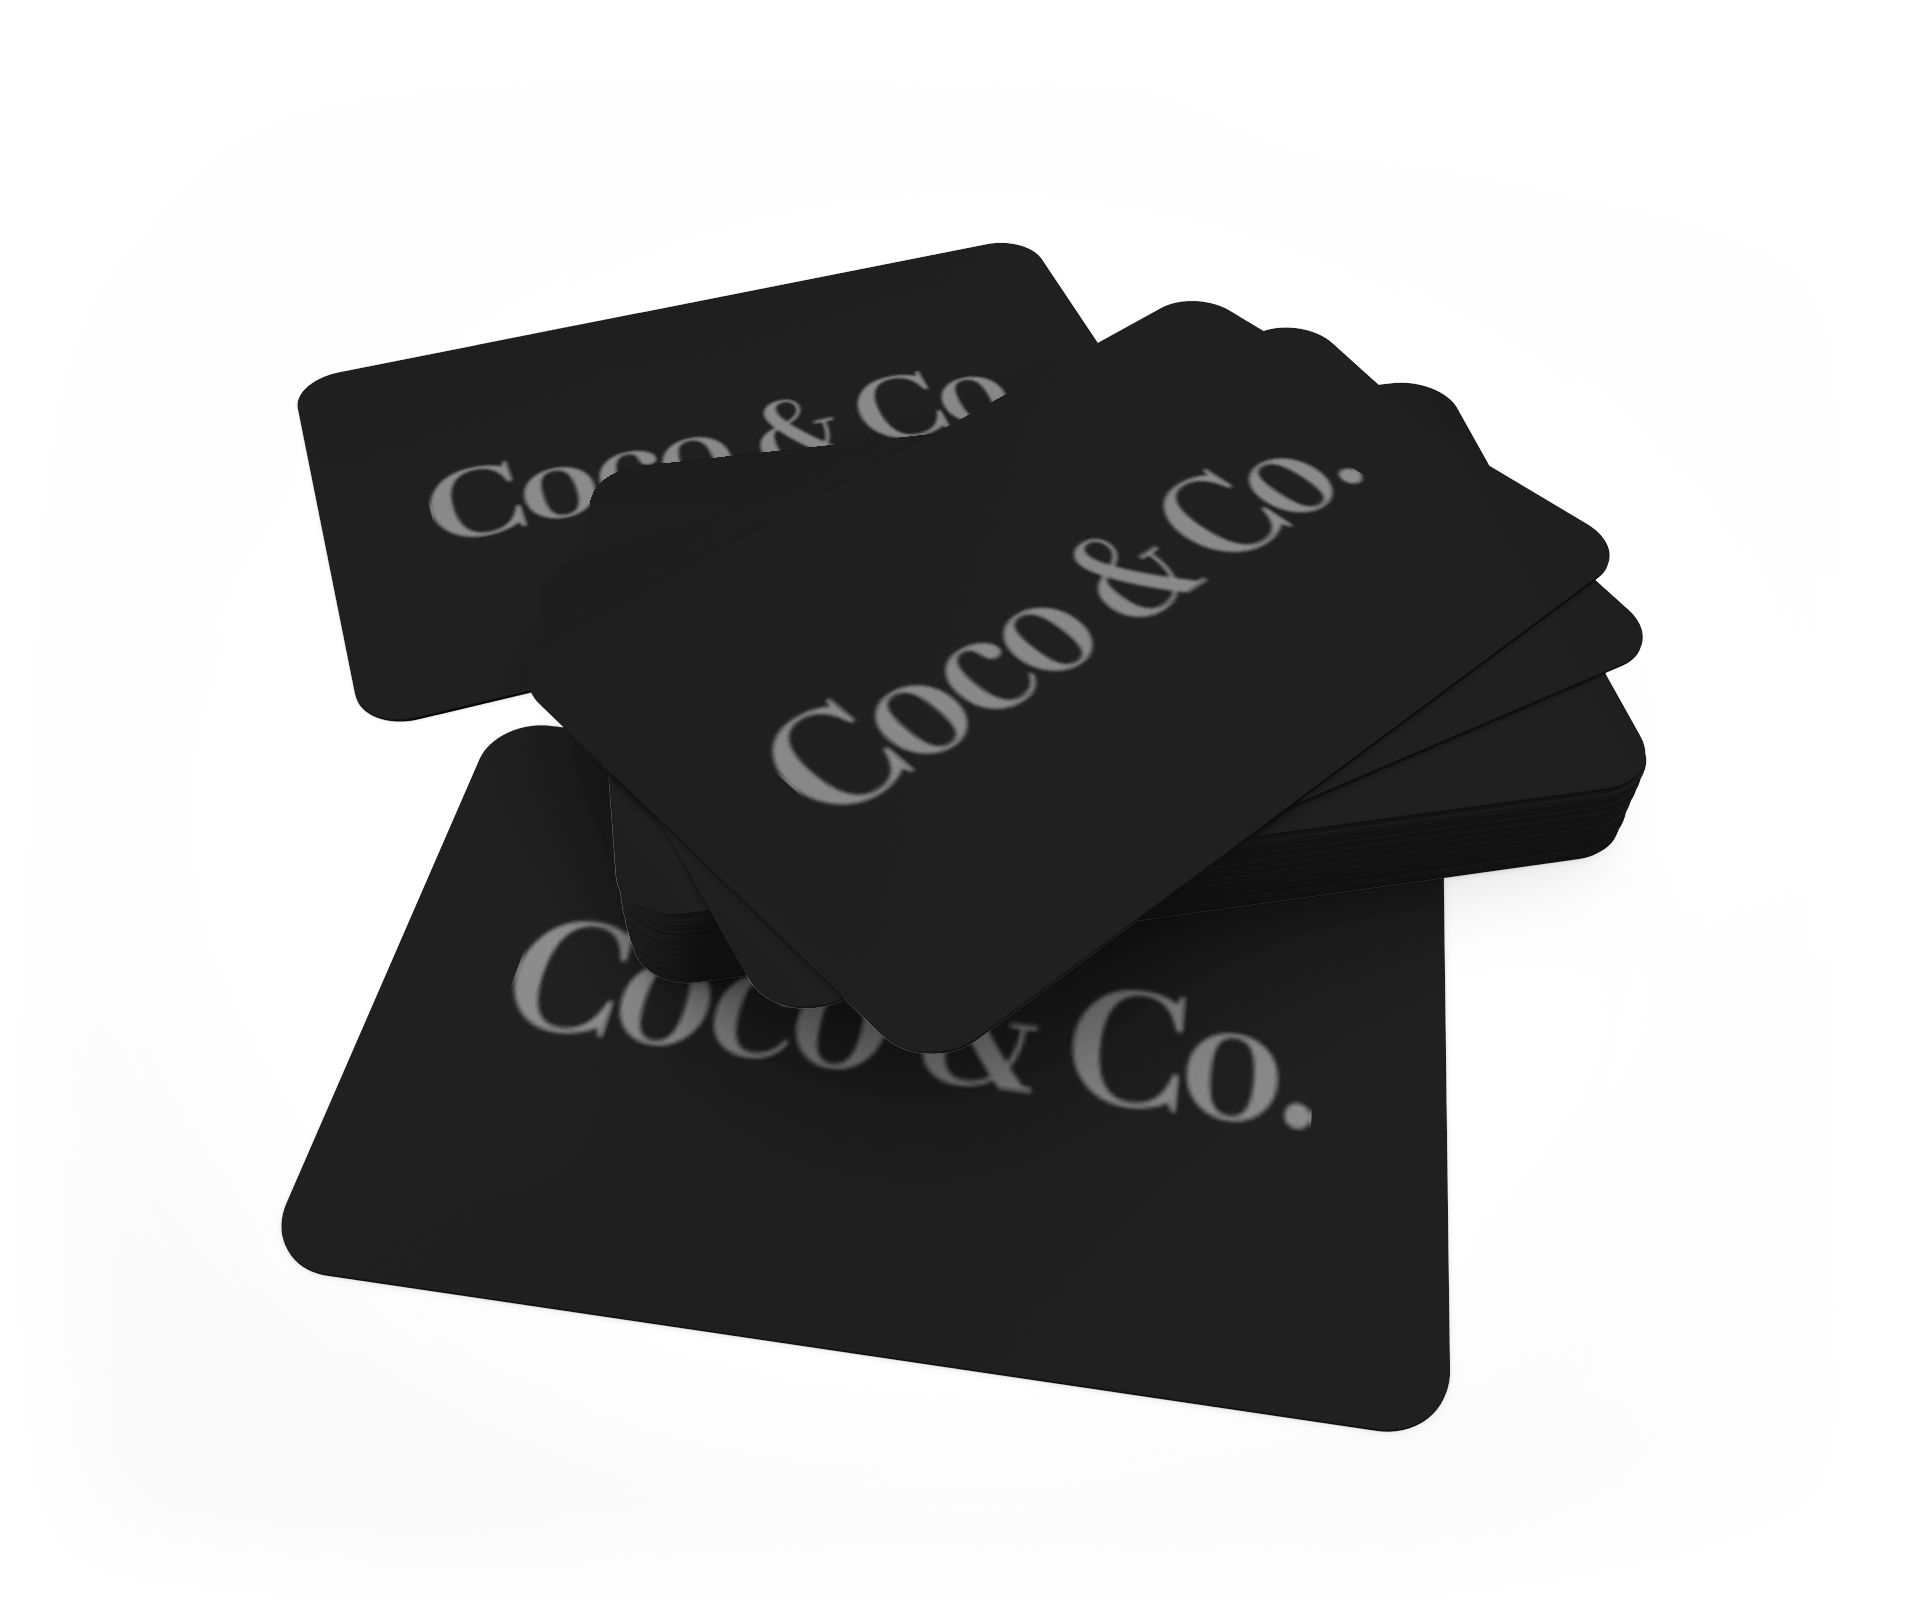 Coco & Co. Digital Gift Cards